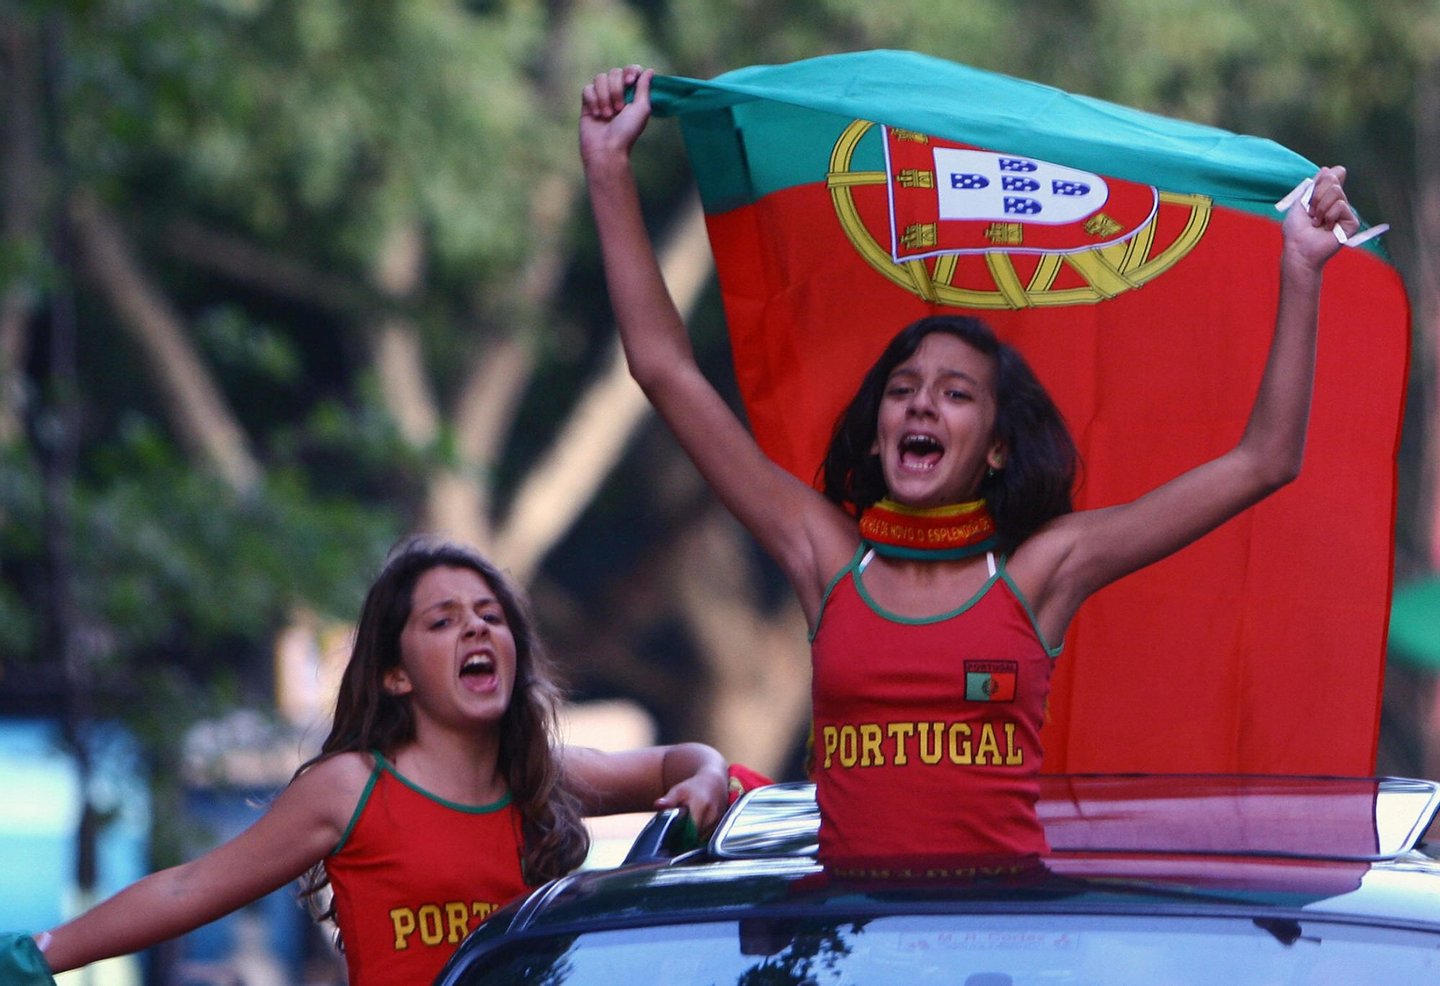 Lisbon, PORTUGAL: Portuguese fans celebrate beating England 1-4 in their World Cup 2006 quarter-final match 01 July 2006 in Lisbon. AFP PHOTO/ FRANCISCO LEONG (Photo credit should read FRANCISCO LEONG/AFP/Getty Images)